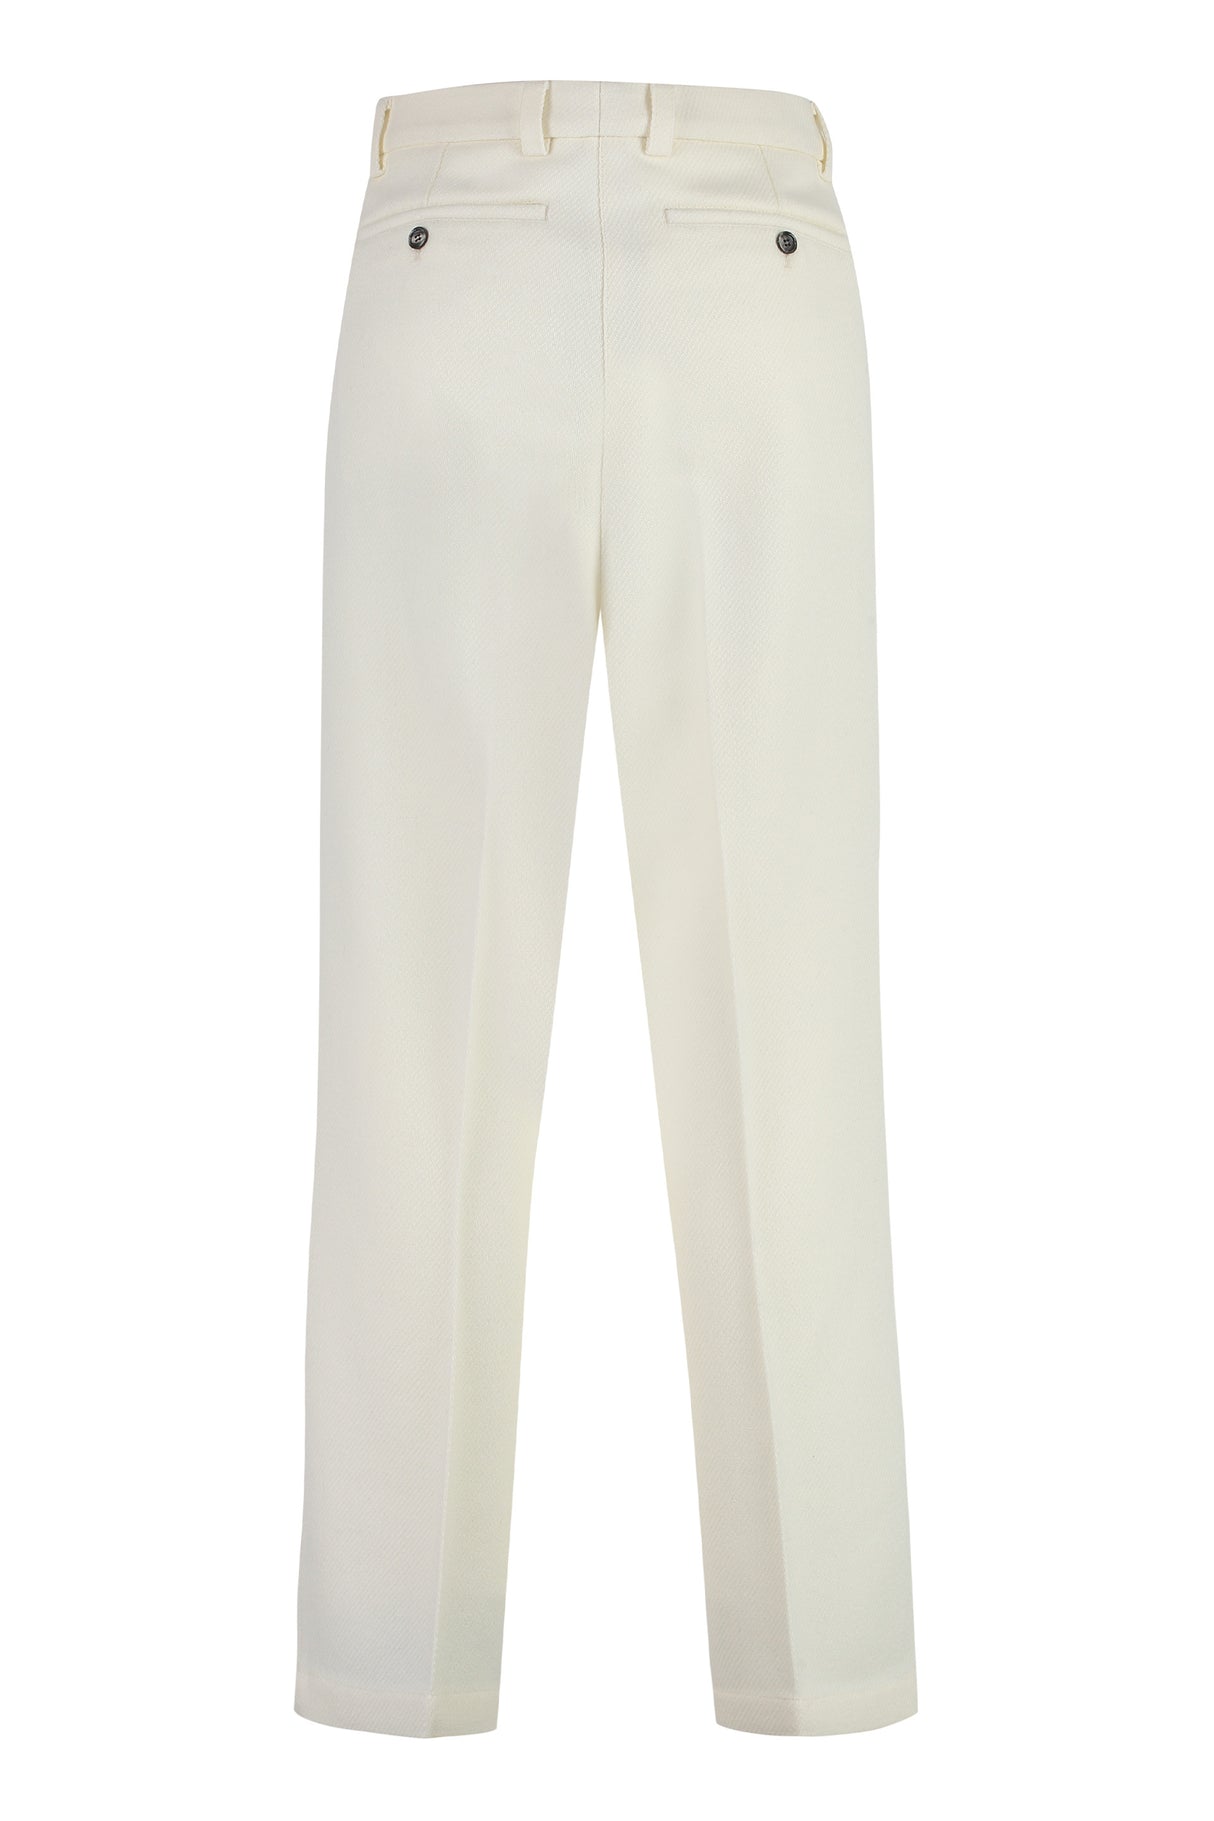 AMI PARIS Men's White Wool Trousers for Fall/Winter '24